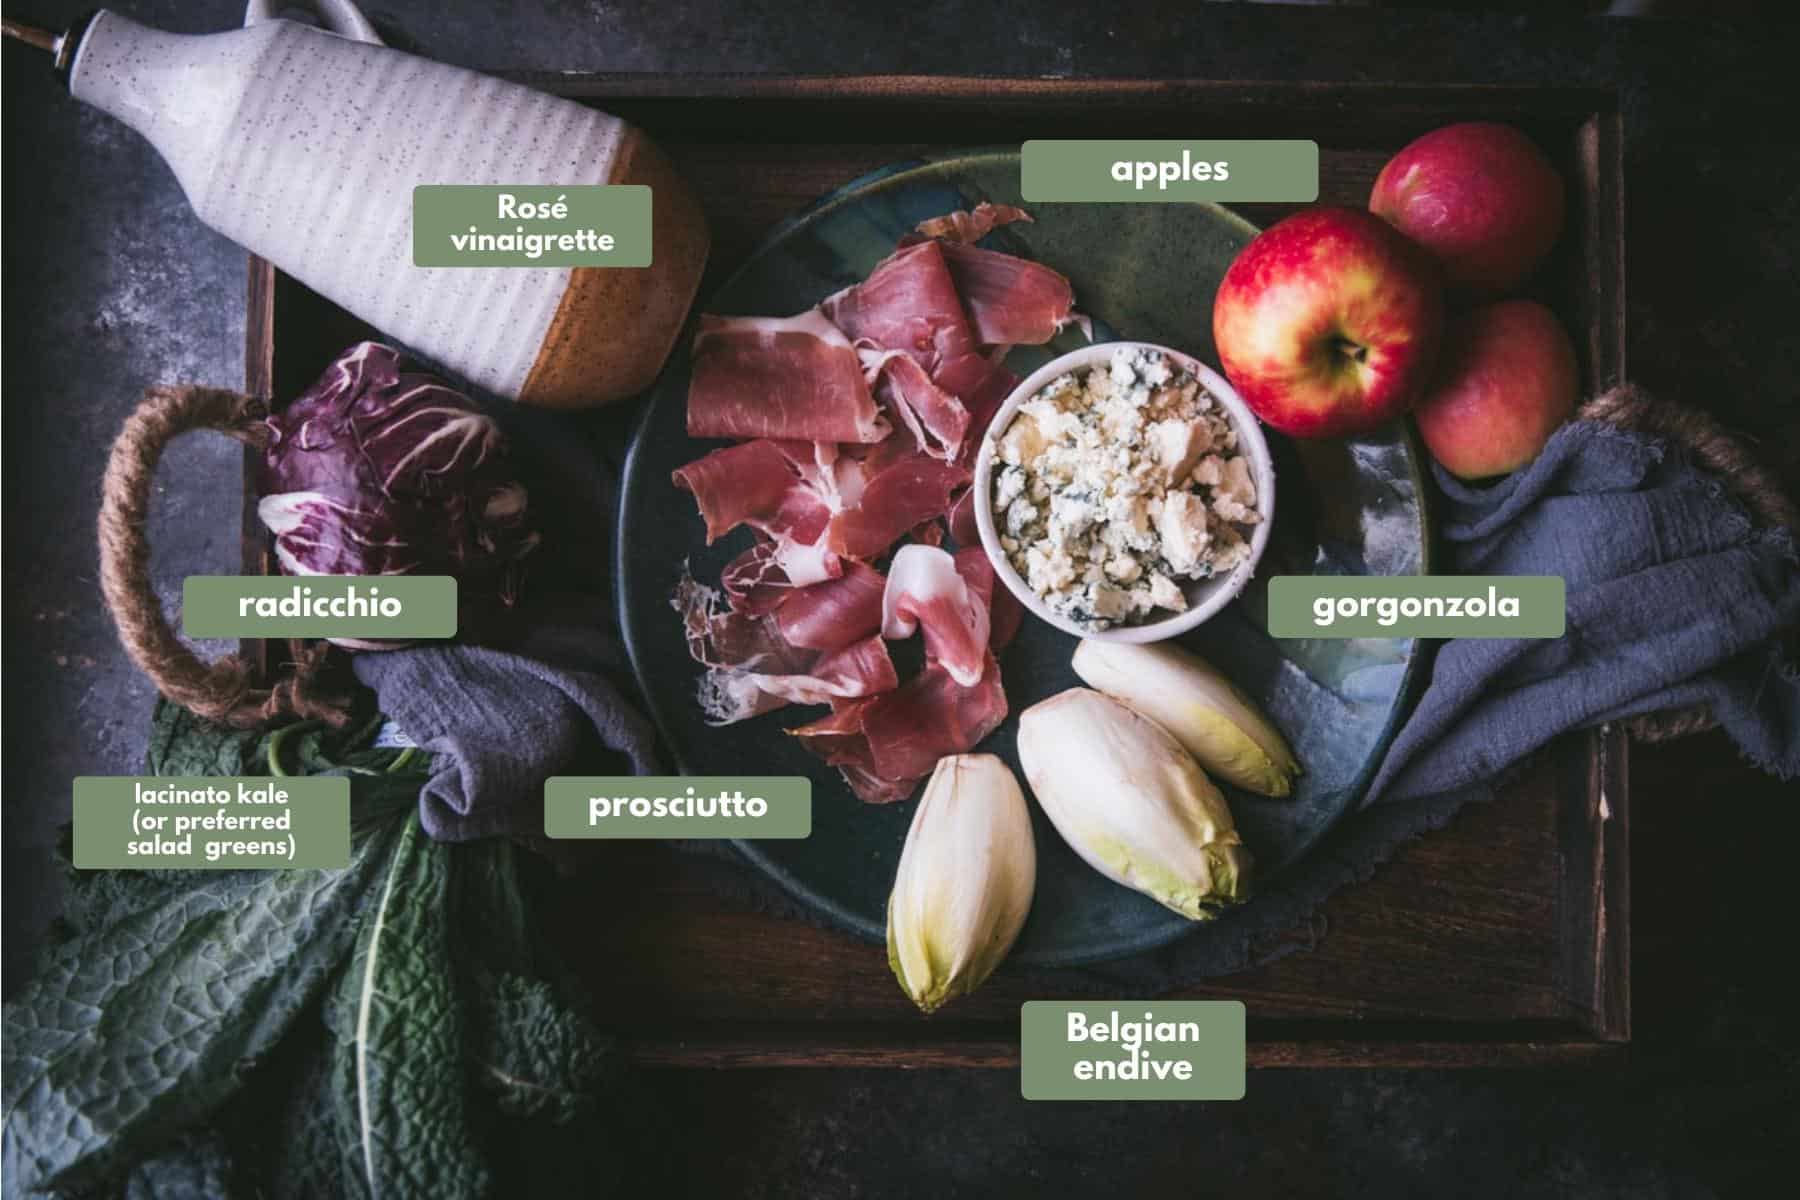 salad ingredients on a ceramic platter over a linen napkin tucked inside a wooden tray.  Ingredients include kale, endive, radicchio, apples, prosciutto, gorgonzola and a ceramic pour bottle of dressing.